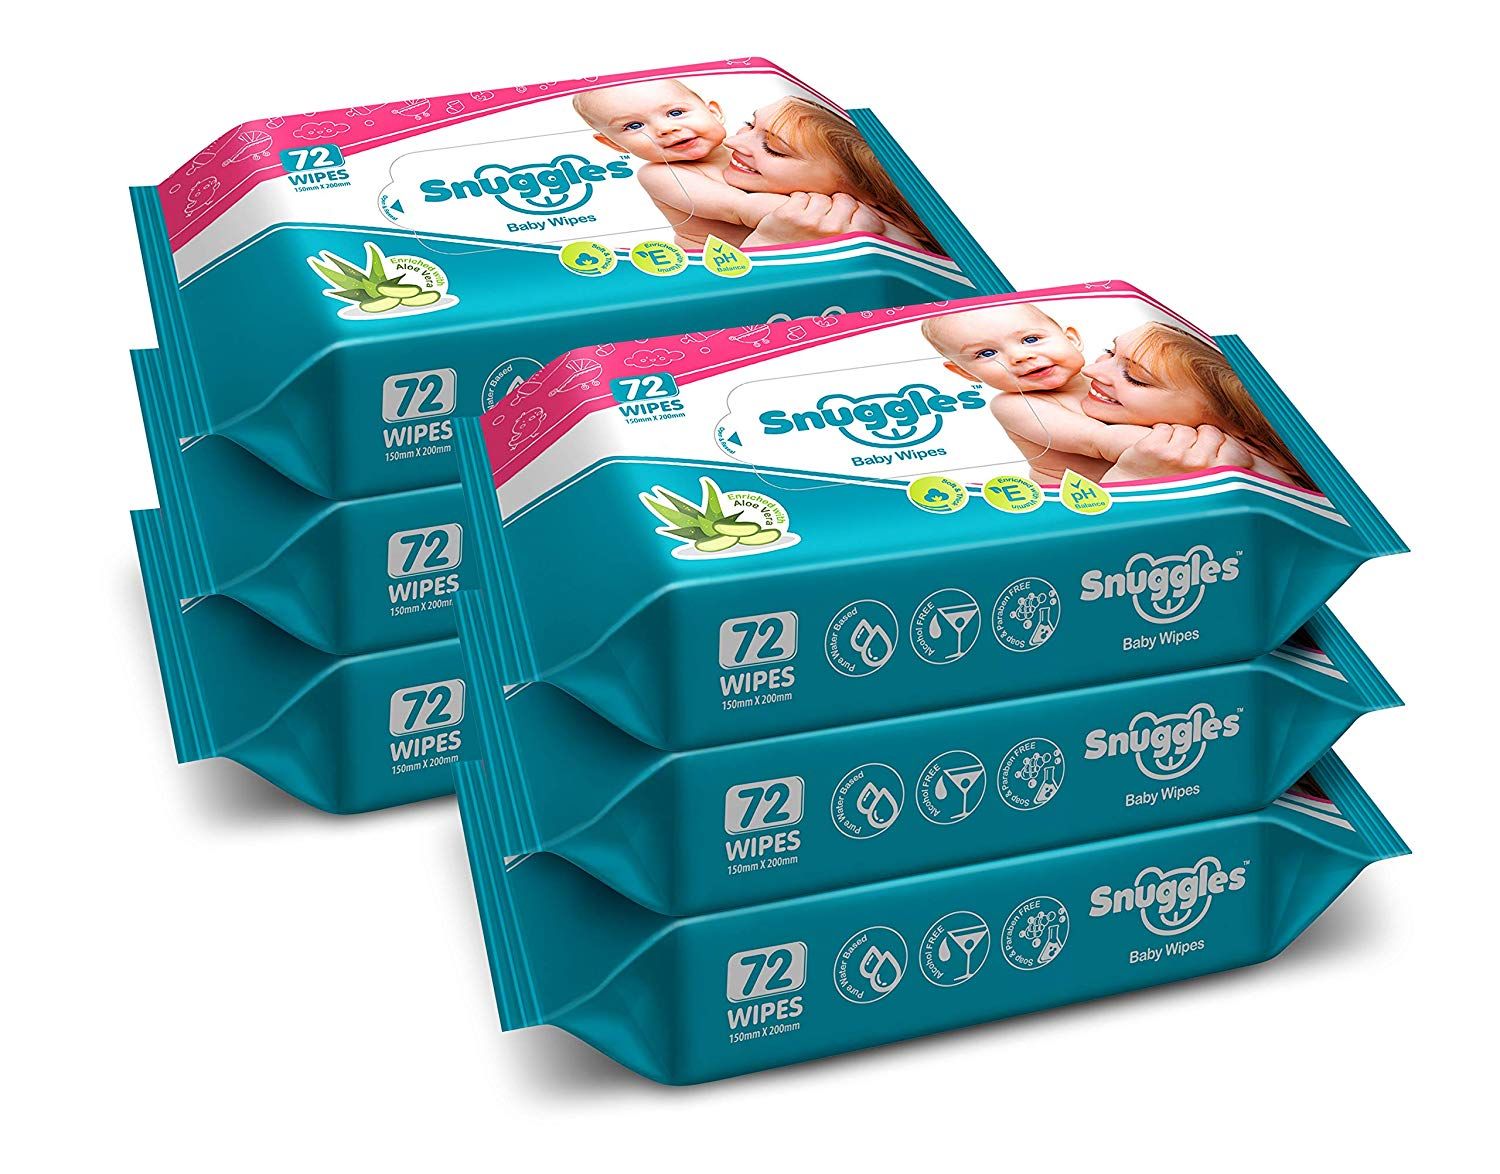 Flat 55% Off:- Snuggles Baby Wet Wipes with Aloe Vera and Vitamin E - 72 Pcs/Pack (Pack of 6)